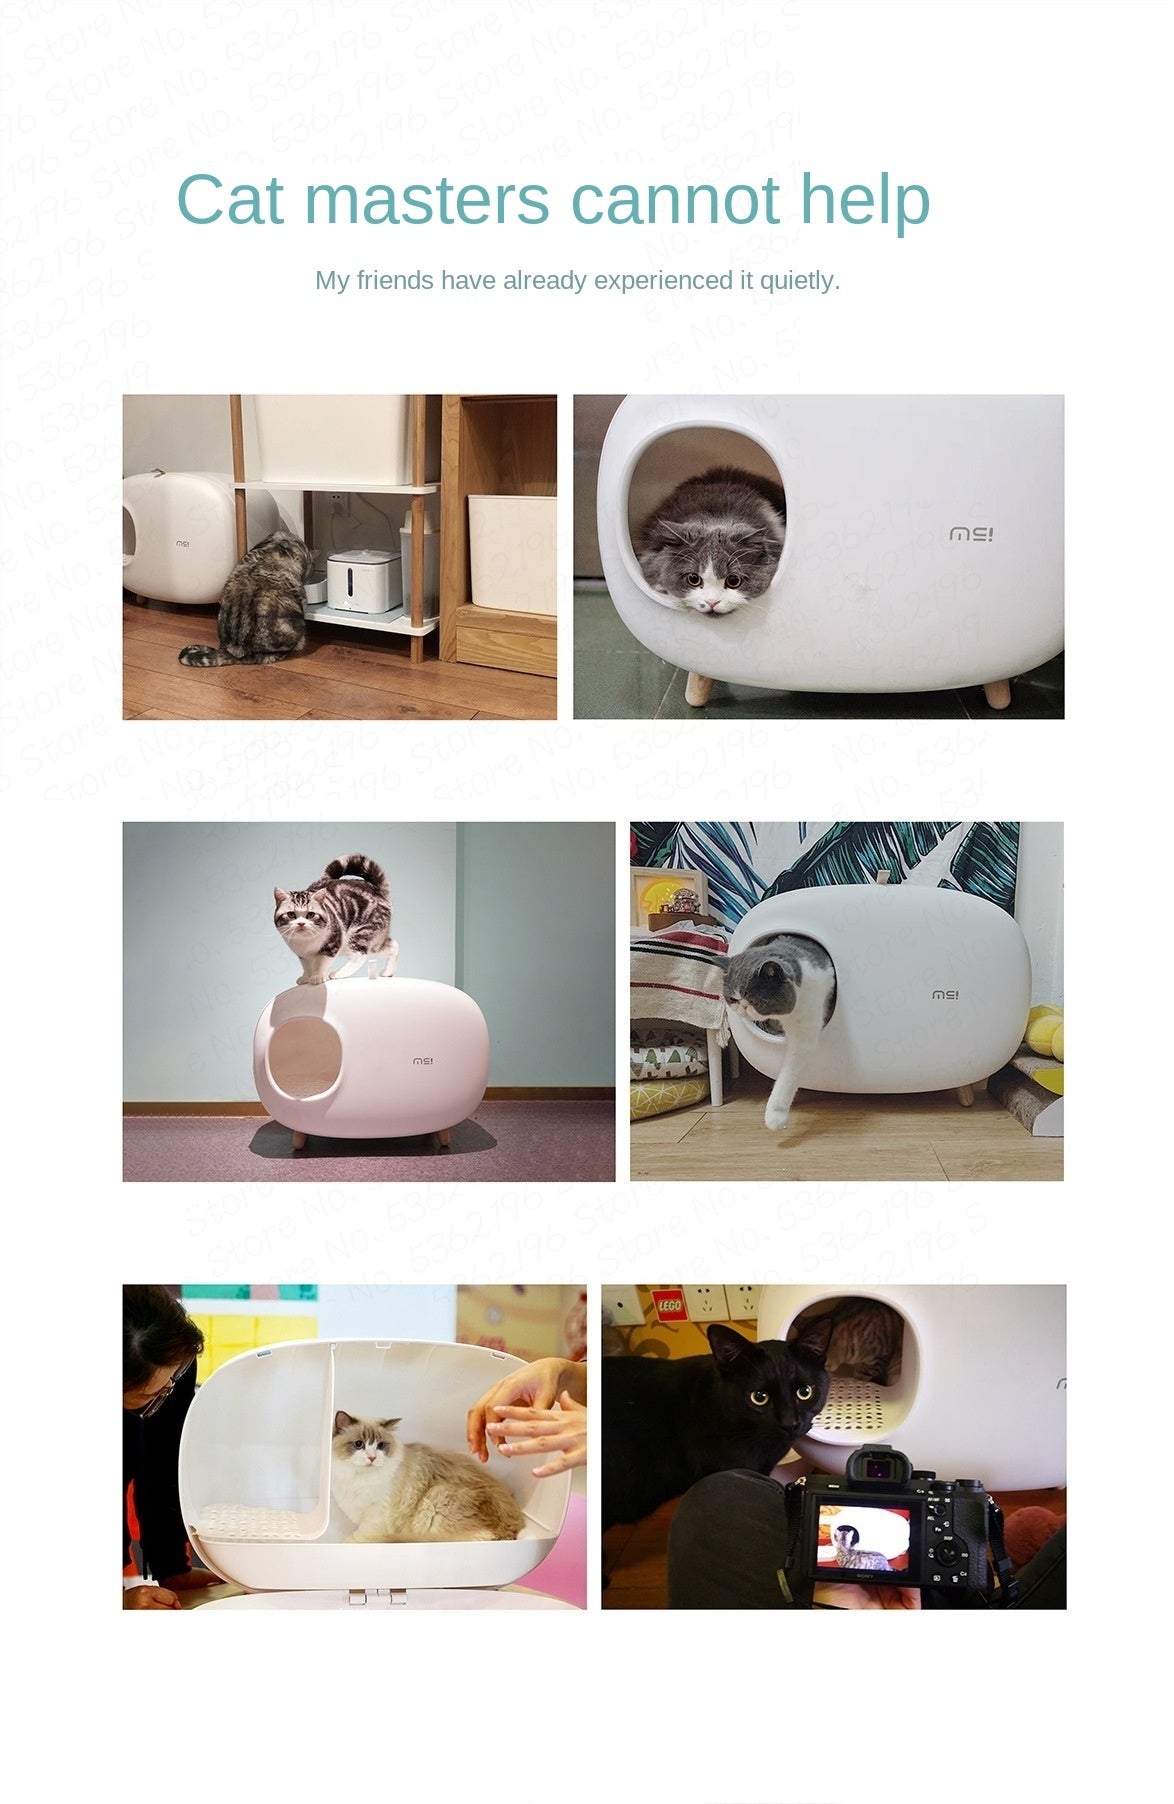 Large Cat Toilet Trainer Macaron Color Cat Litter Box Fully Enclosed Cat Feces Basin Mochi Pet Cat Litter Mat Cat Toilet Pet Supplies Eco-friendly Cat Toilet Stylish Cat Litter Solution Stress-Free Cat Environment Easy-to-Clean Cat Toilet Cat Comfort and Happiness